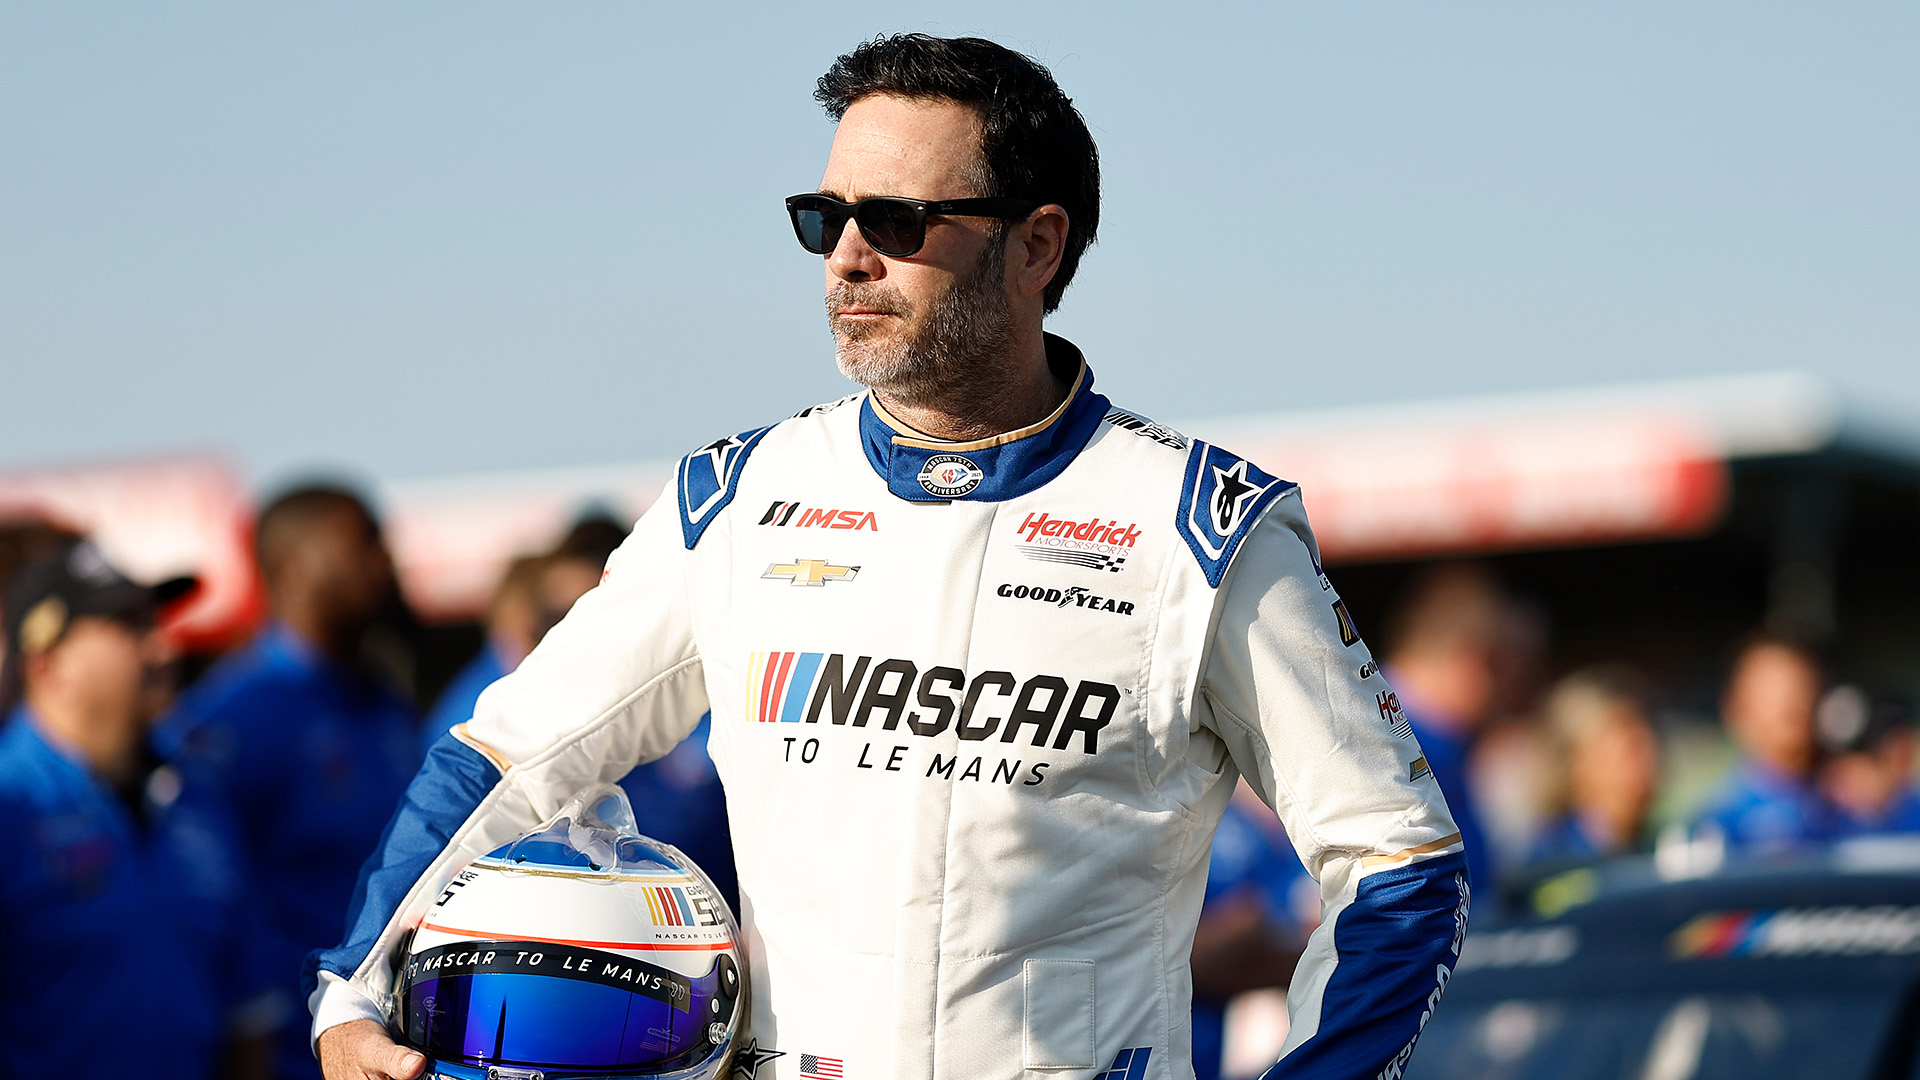 LE MANS, FRANCE - JUNE 05: Jimmie Johnson, driver of the #24 NASCAR Next Gen Chevrolet ZL1 looks on prior to the 100th anniversary of the 24 Hours of Le Mans at the Circuit de la Sarthe June 5, 2023 in Le Mans, France. (Photo by Chris Graythen/Getty Images)